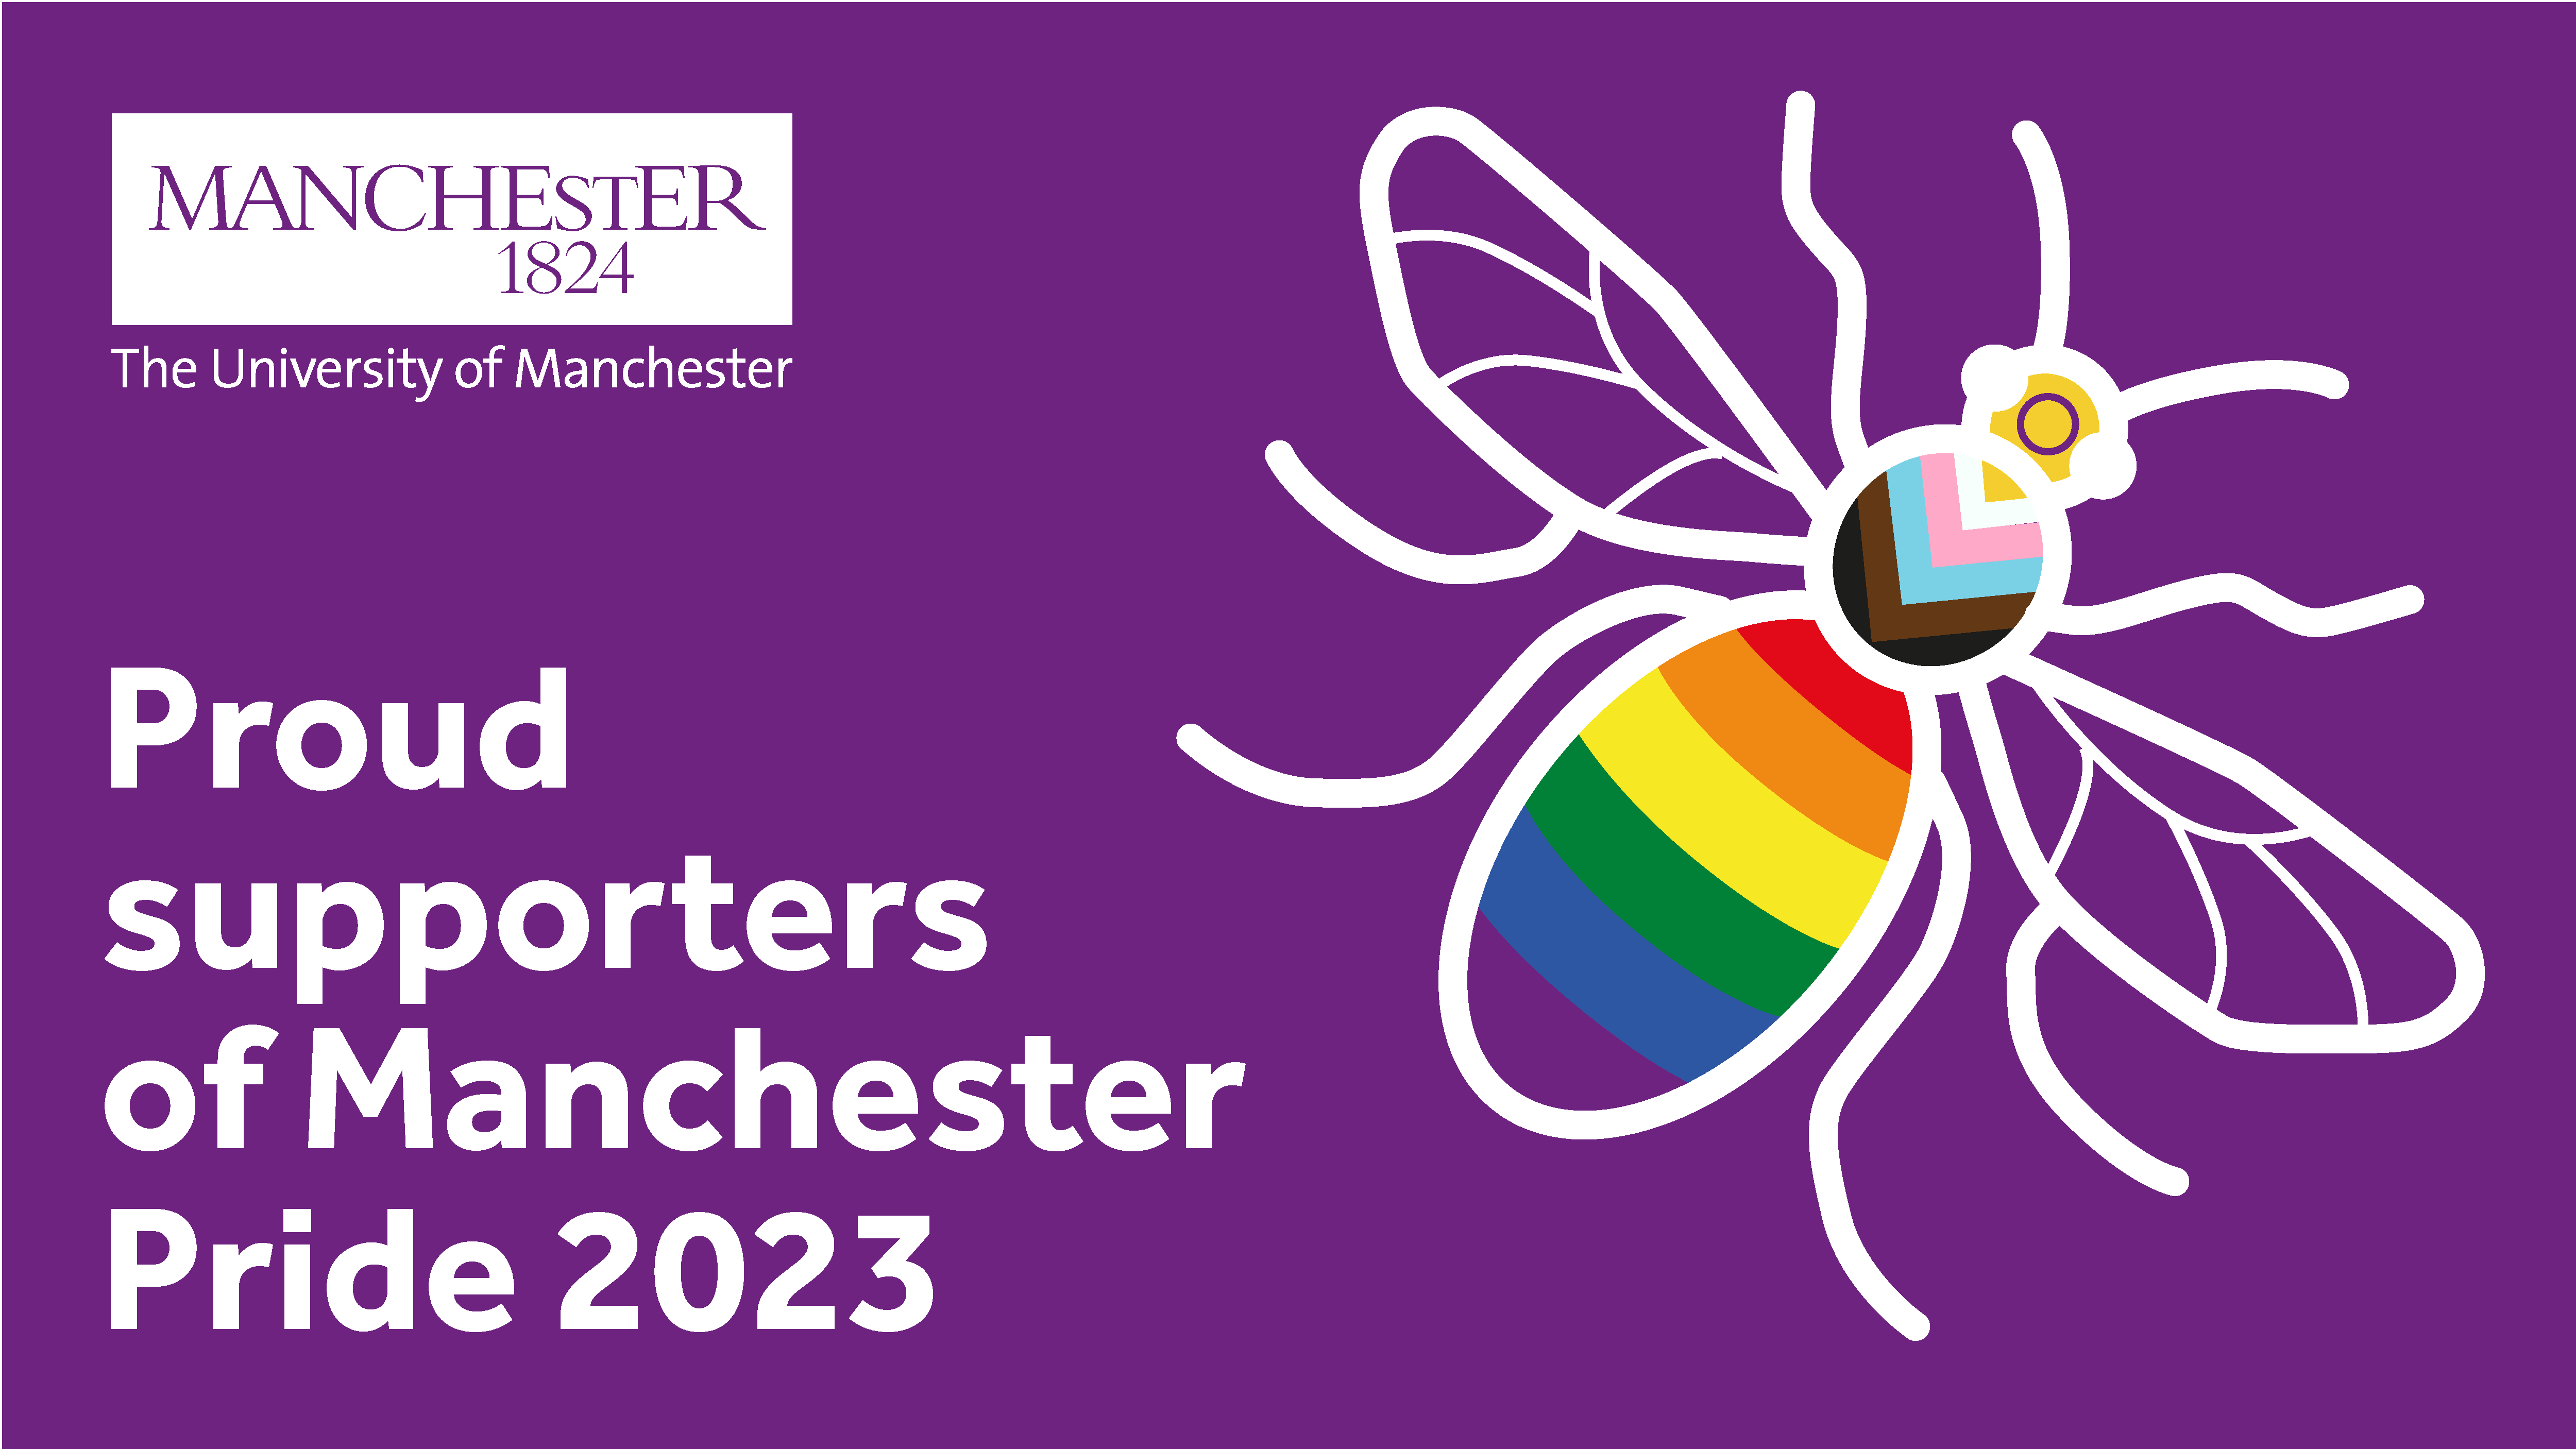 Manchester bee with pride rainbow colours on a purple background, with the text "Proud supporters of Manchester Pride 2023"